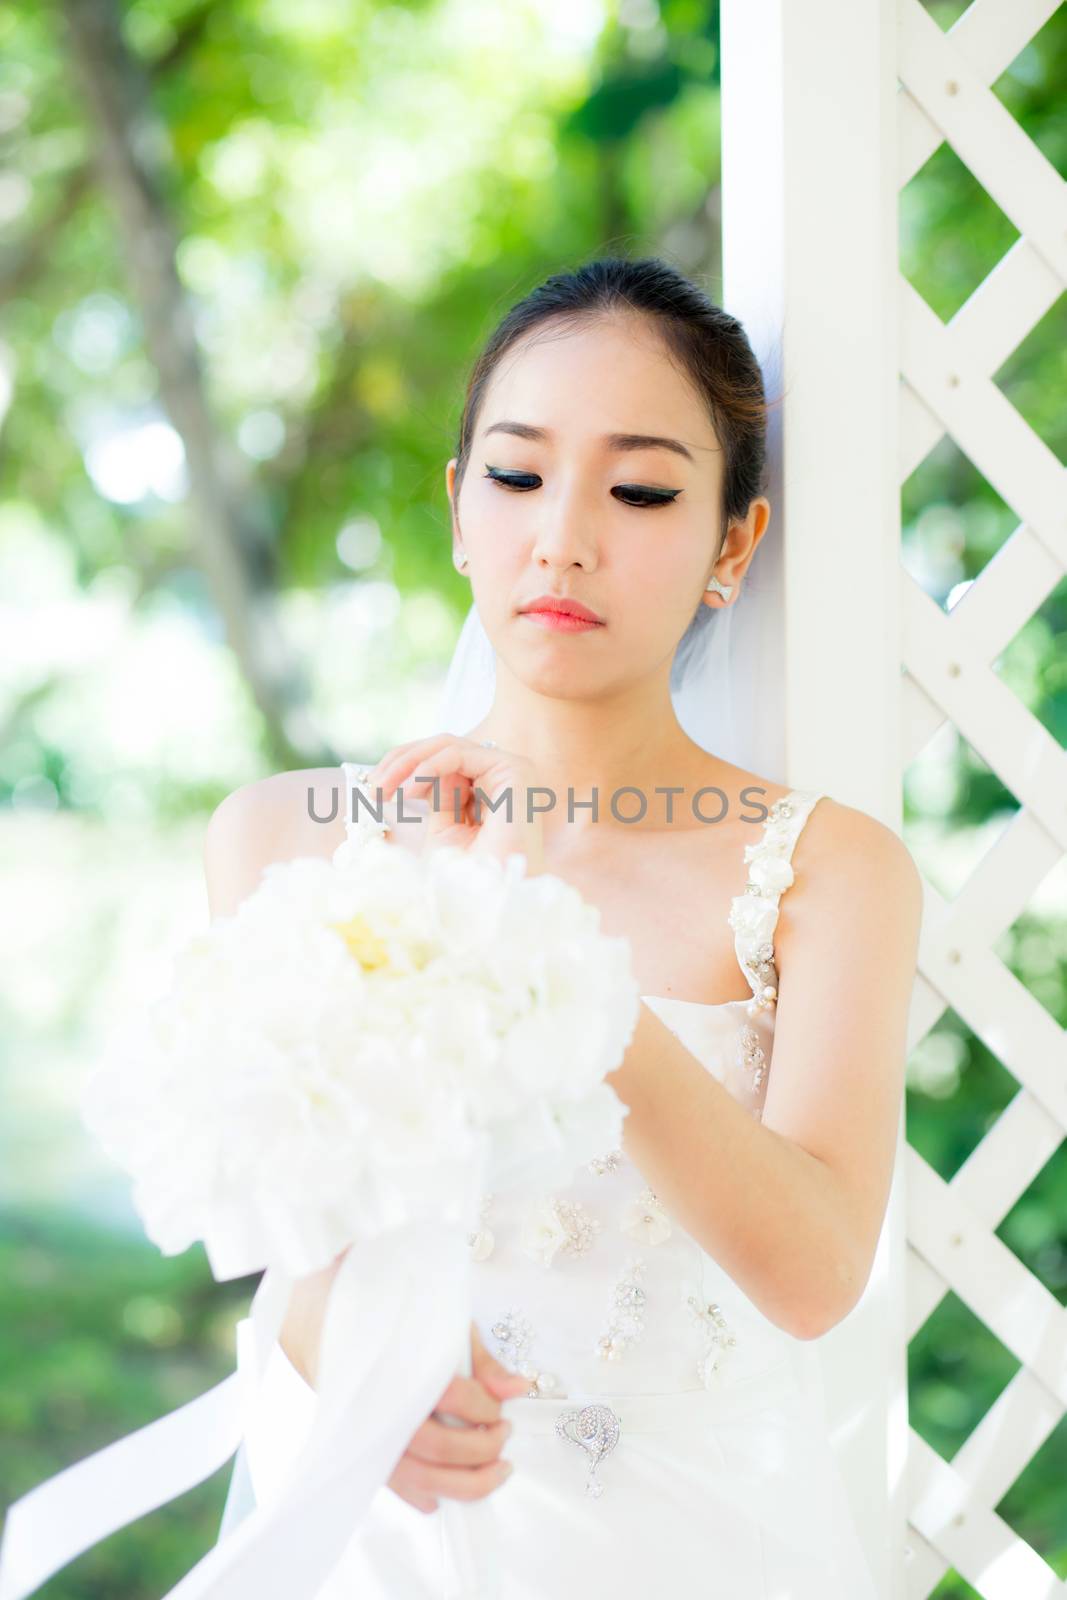 beautiful young woman on wedding day in white dress in the garden. Female portrait in the park - Selective focus.